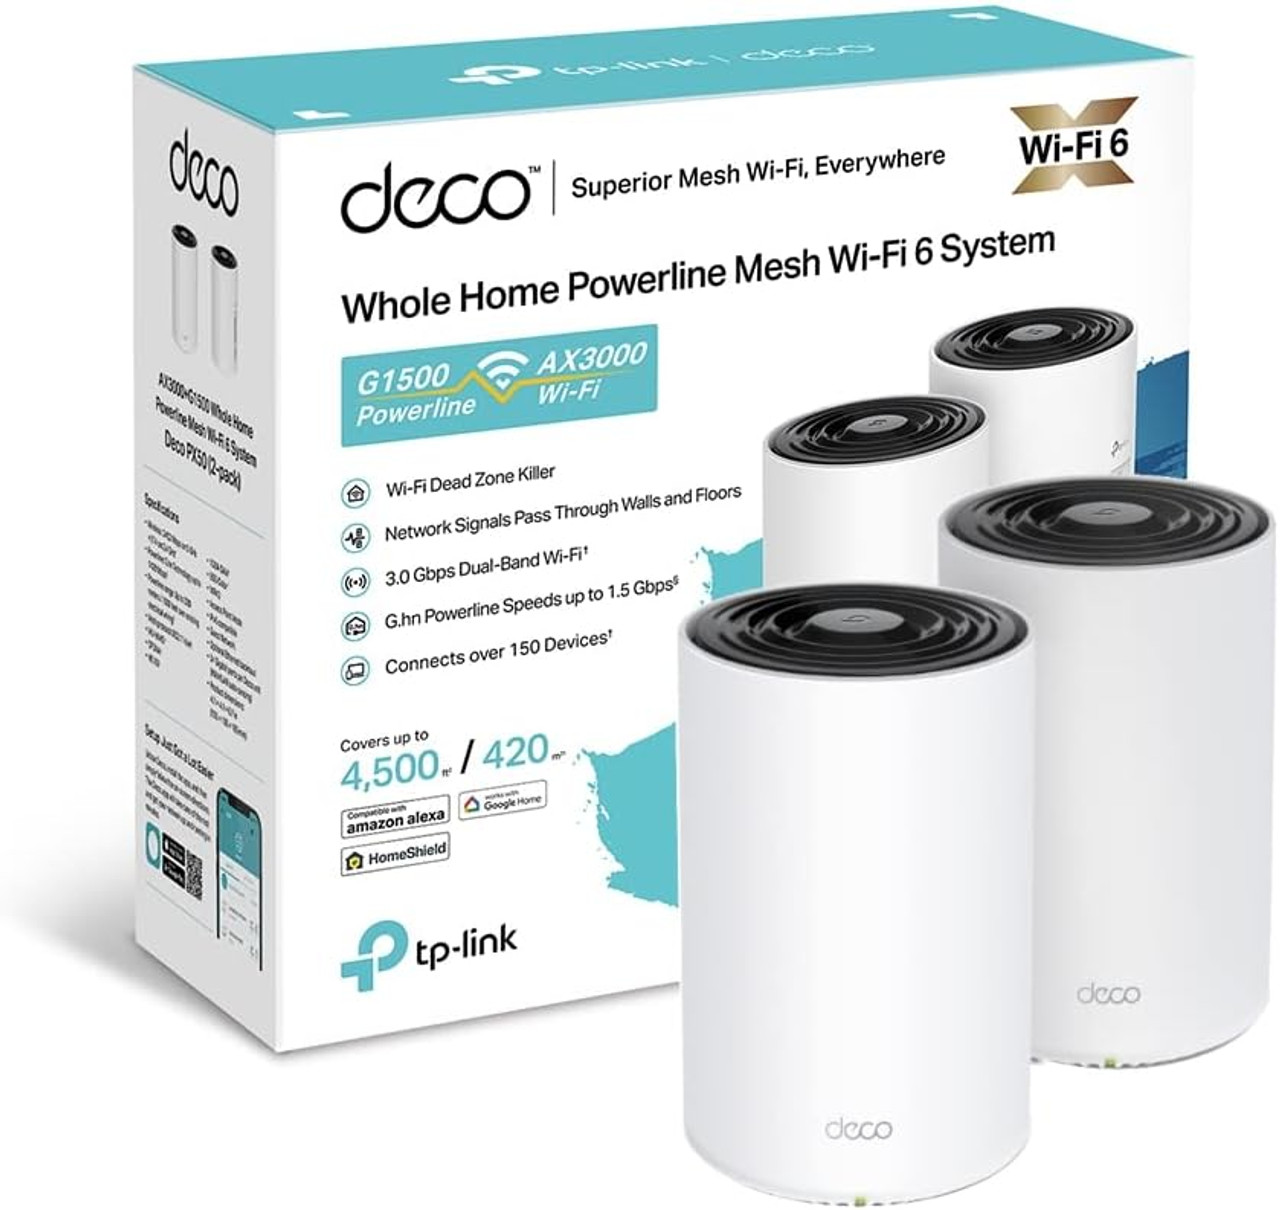 TP-Link Deco M4 (2 Pack) AC1200 Dual Band Whole Home Wireless Mesh